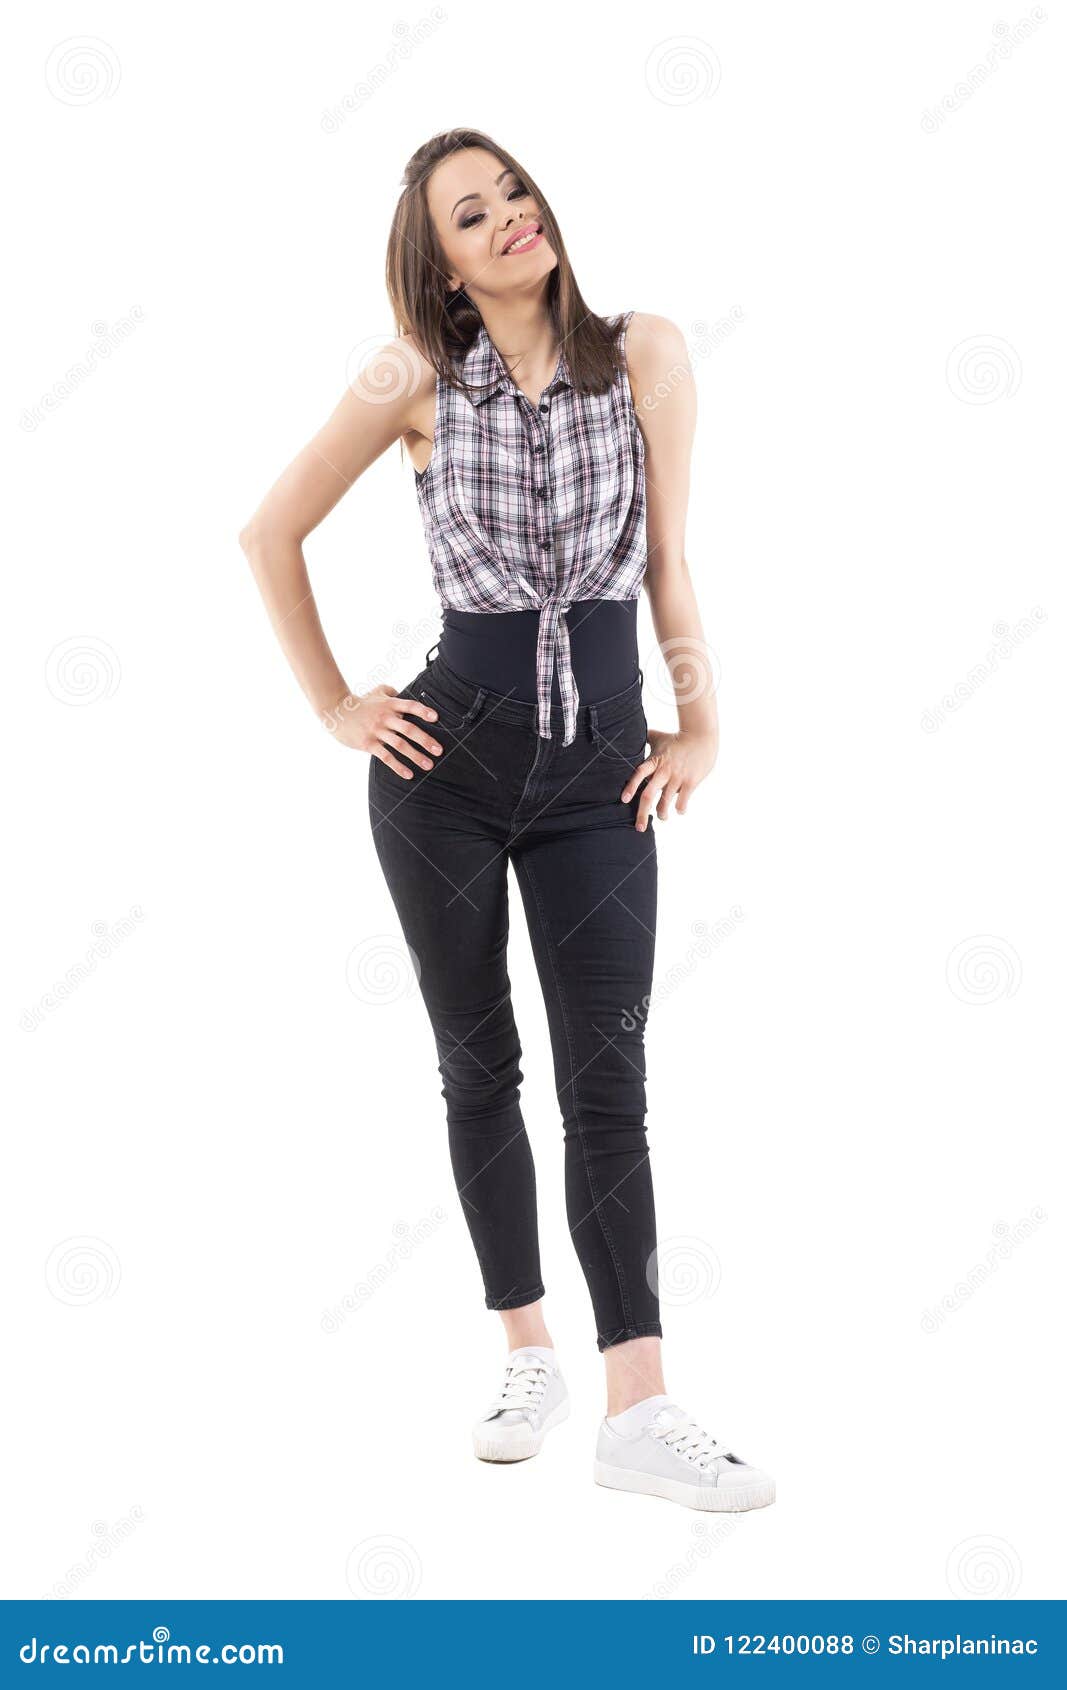 Cute Pretty Teenage Girl Posing in Checkered Shirt Tied in Knot. Stock ...